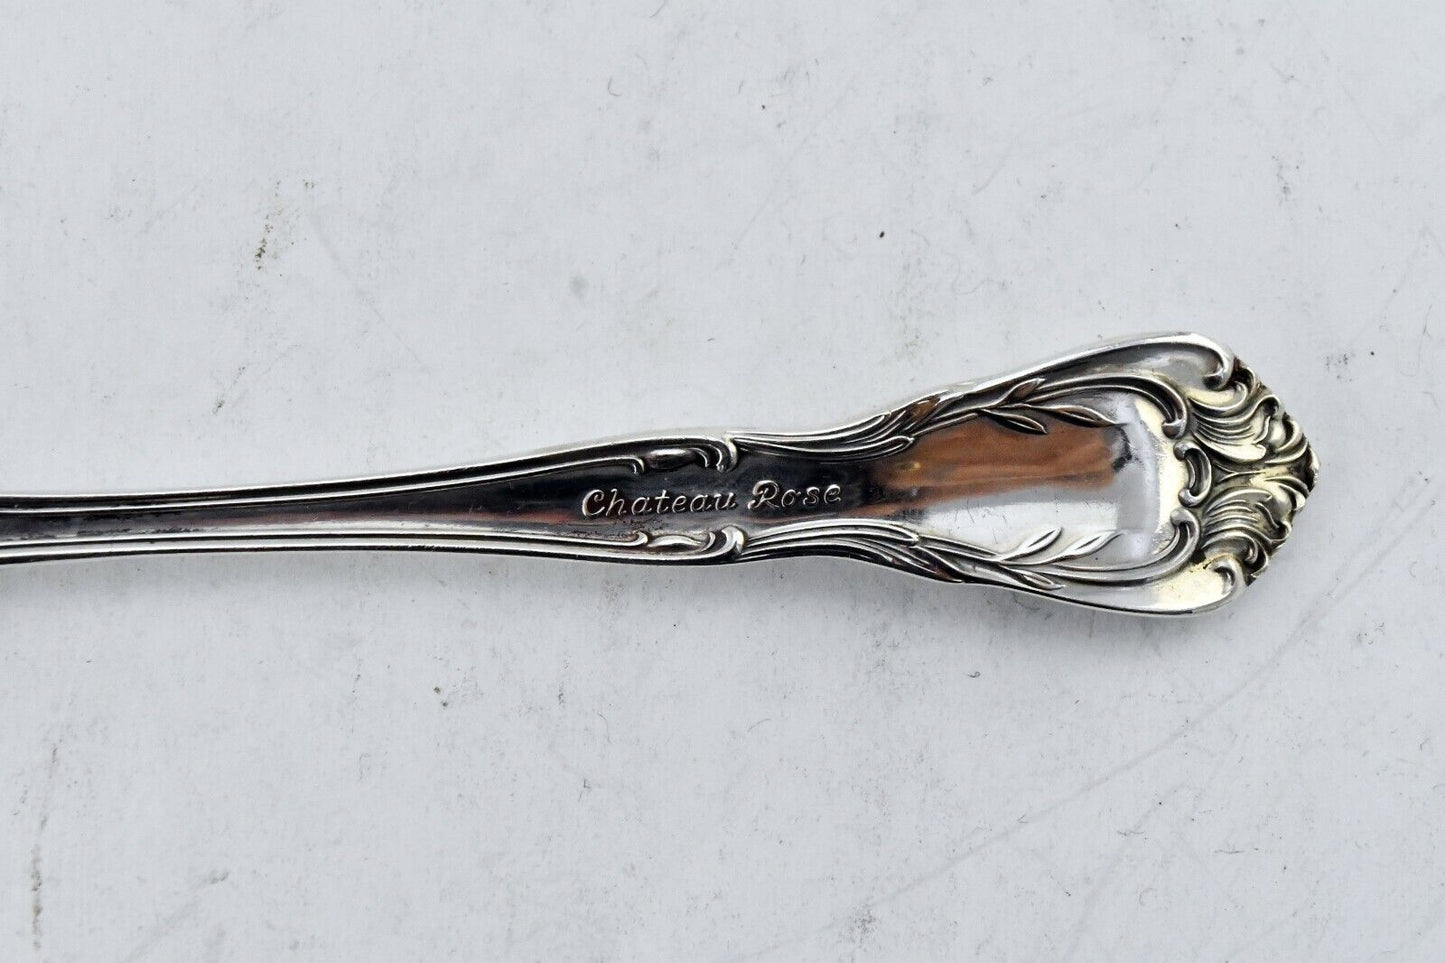 Chateau Rose by Alvin Sterling Silver 7 1/8" Solid Master Butter Spreader 1oz.